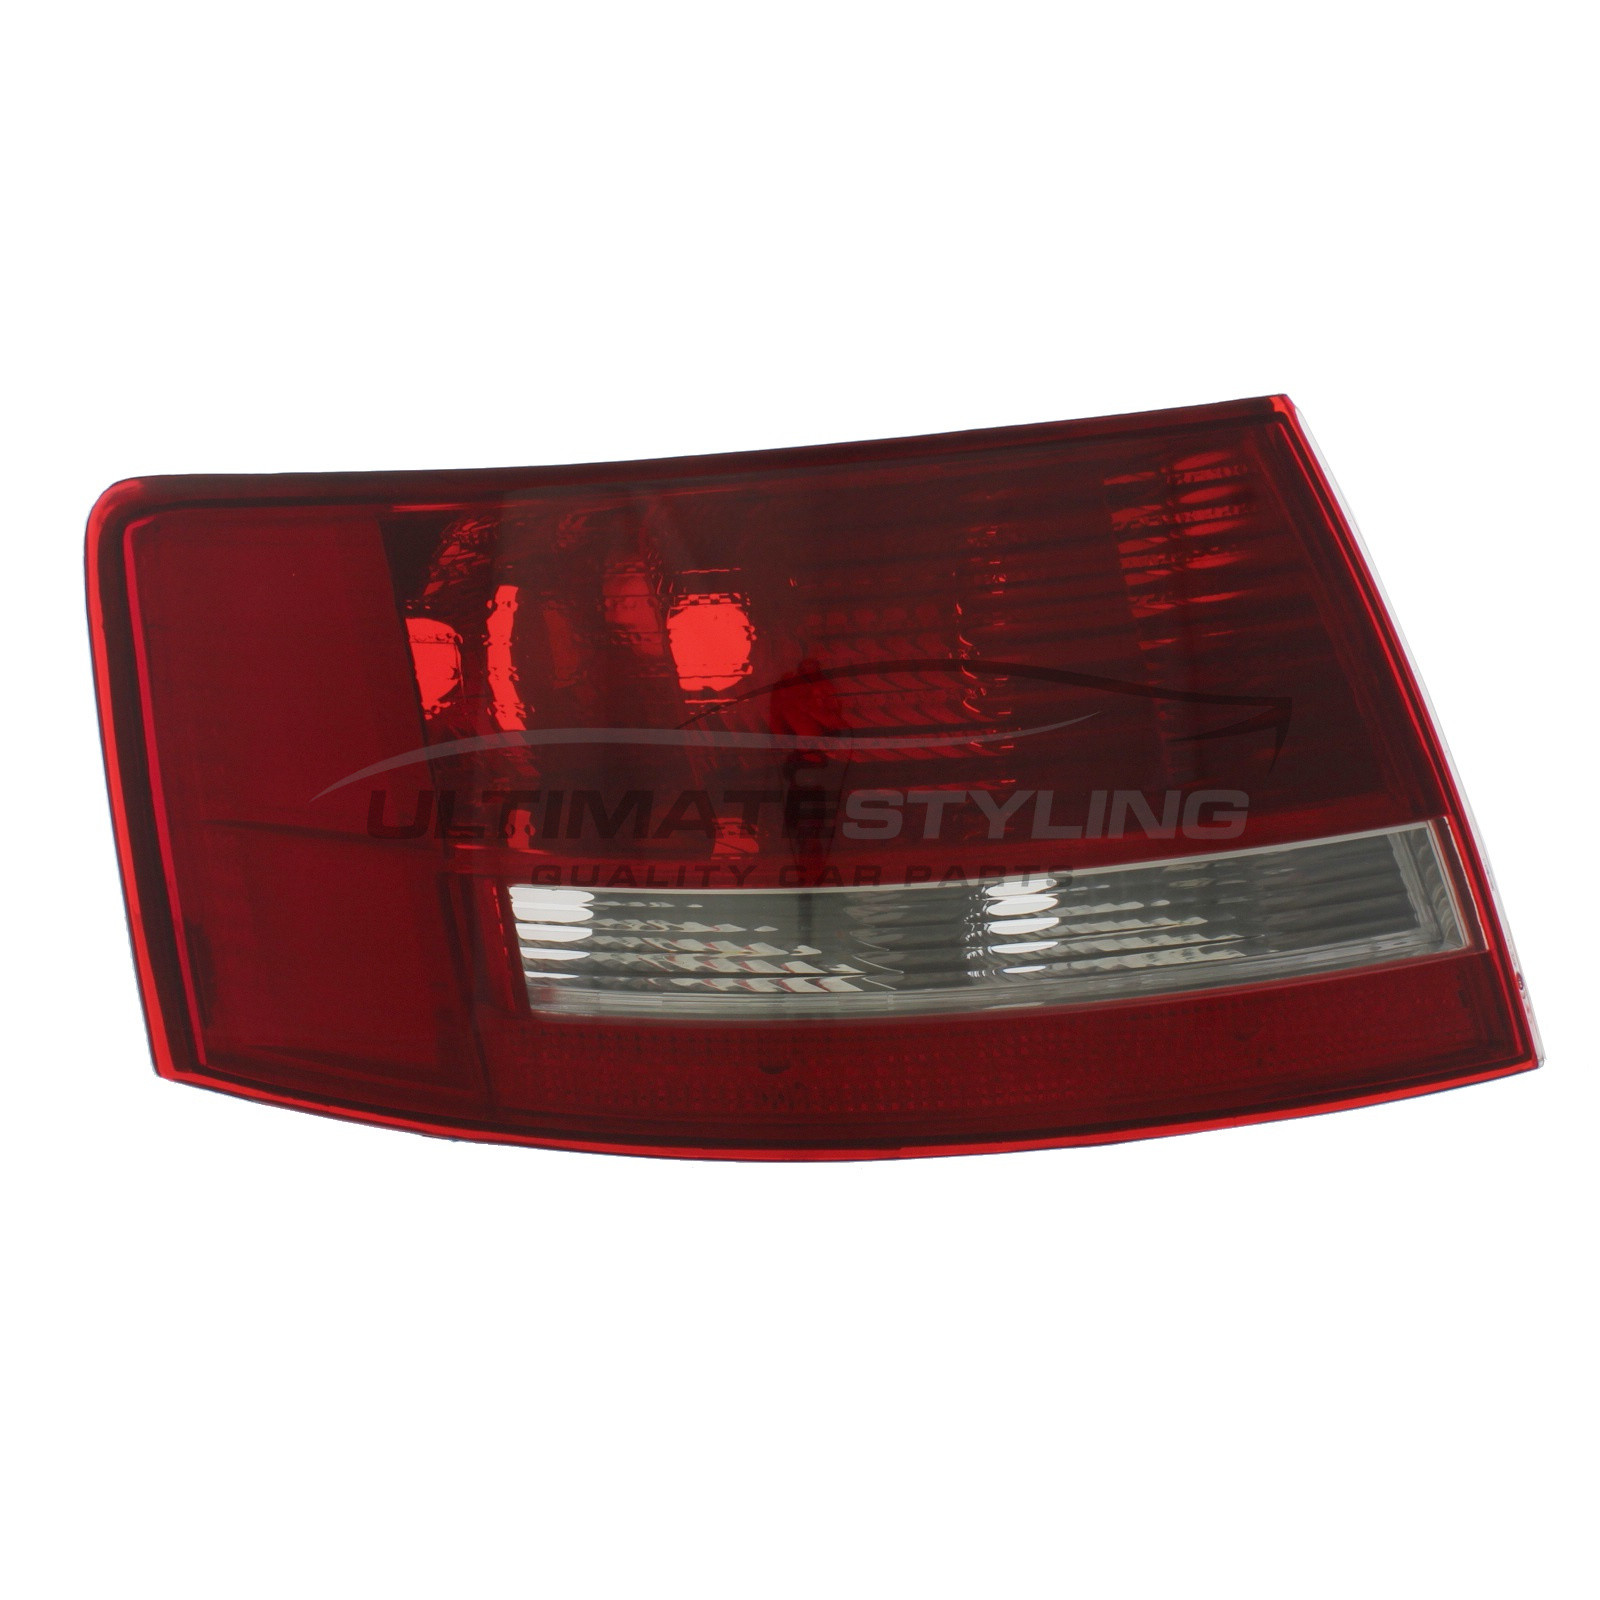 Audi A6 2004-2008 Non-LED with Clear Indicator Rear Light / Tail Light Excluding Bulb Holder Passenger Side (LH)